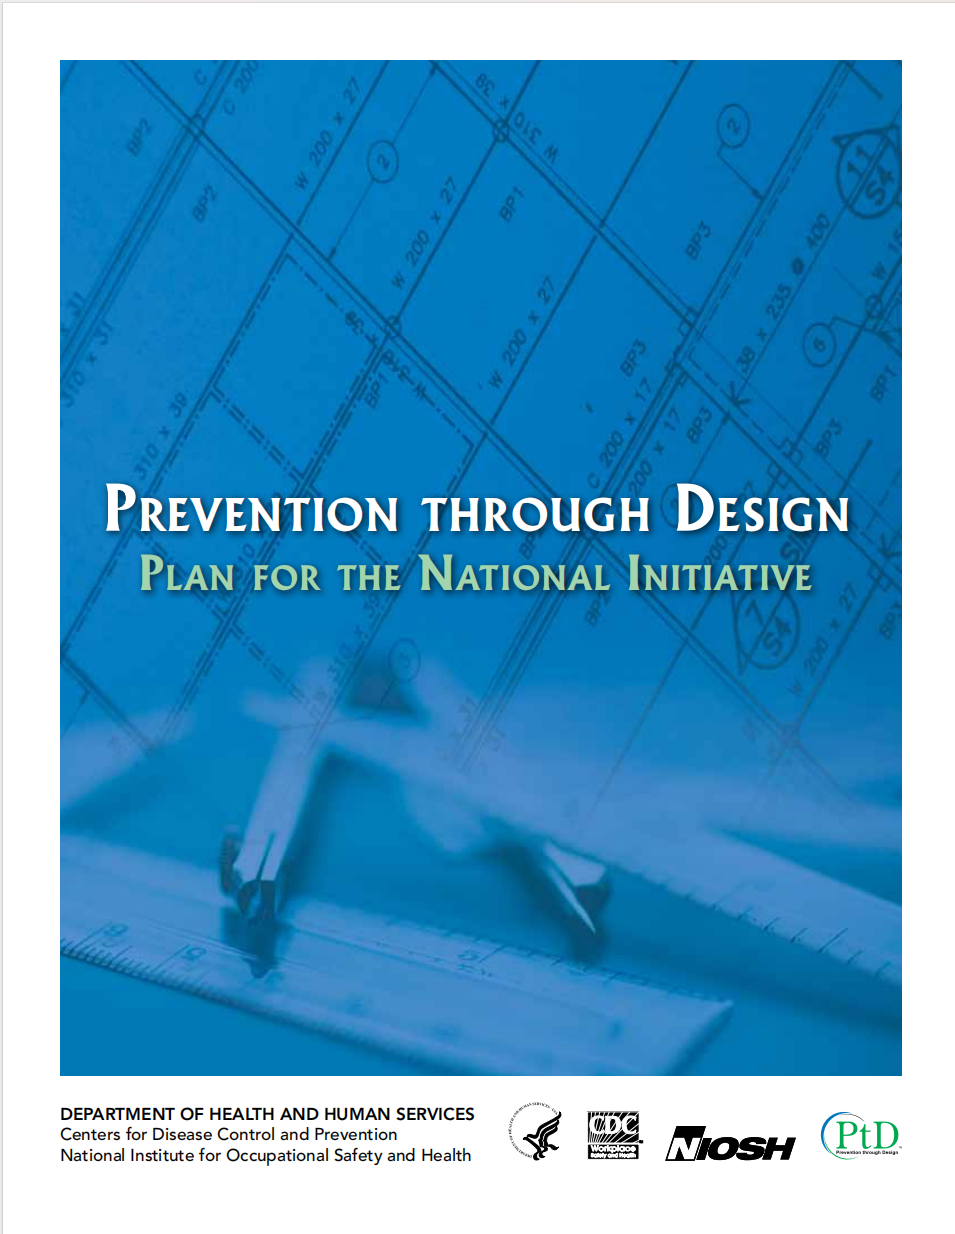 Prevention through Design Plan for the National Initiative